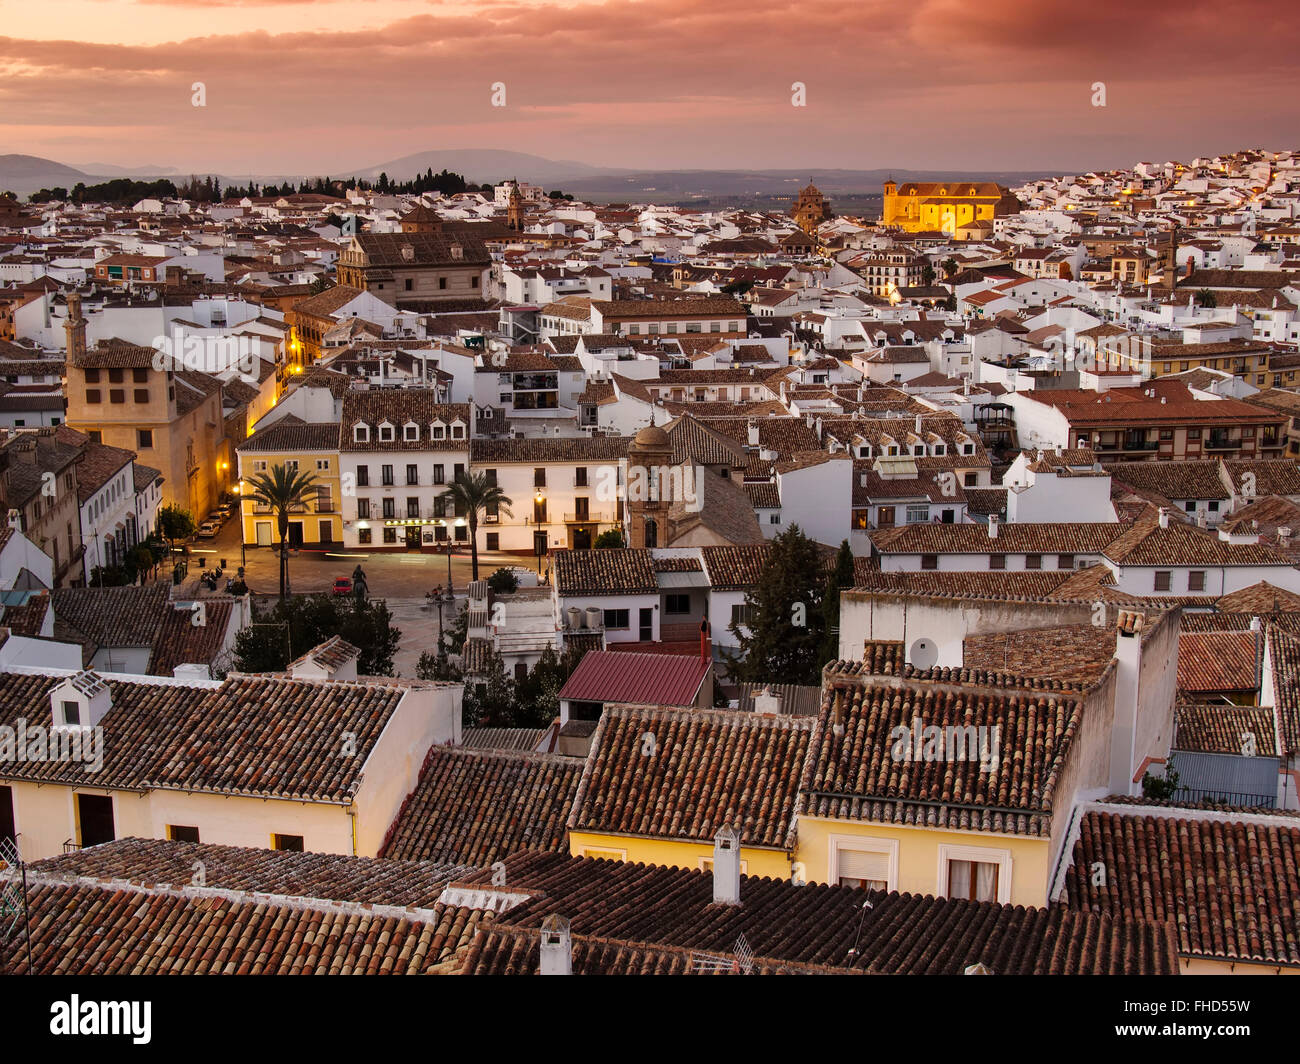 Sunset, monumental city Antequera, Malaga province. Andalusia southern Spain Stock Photo